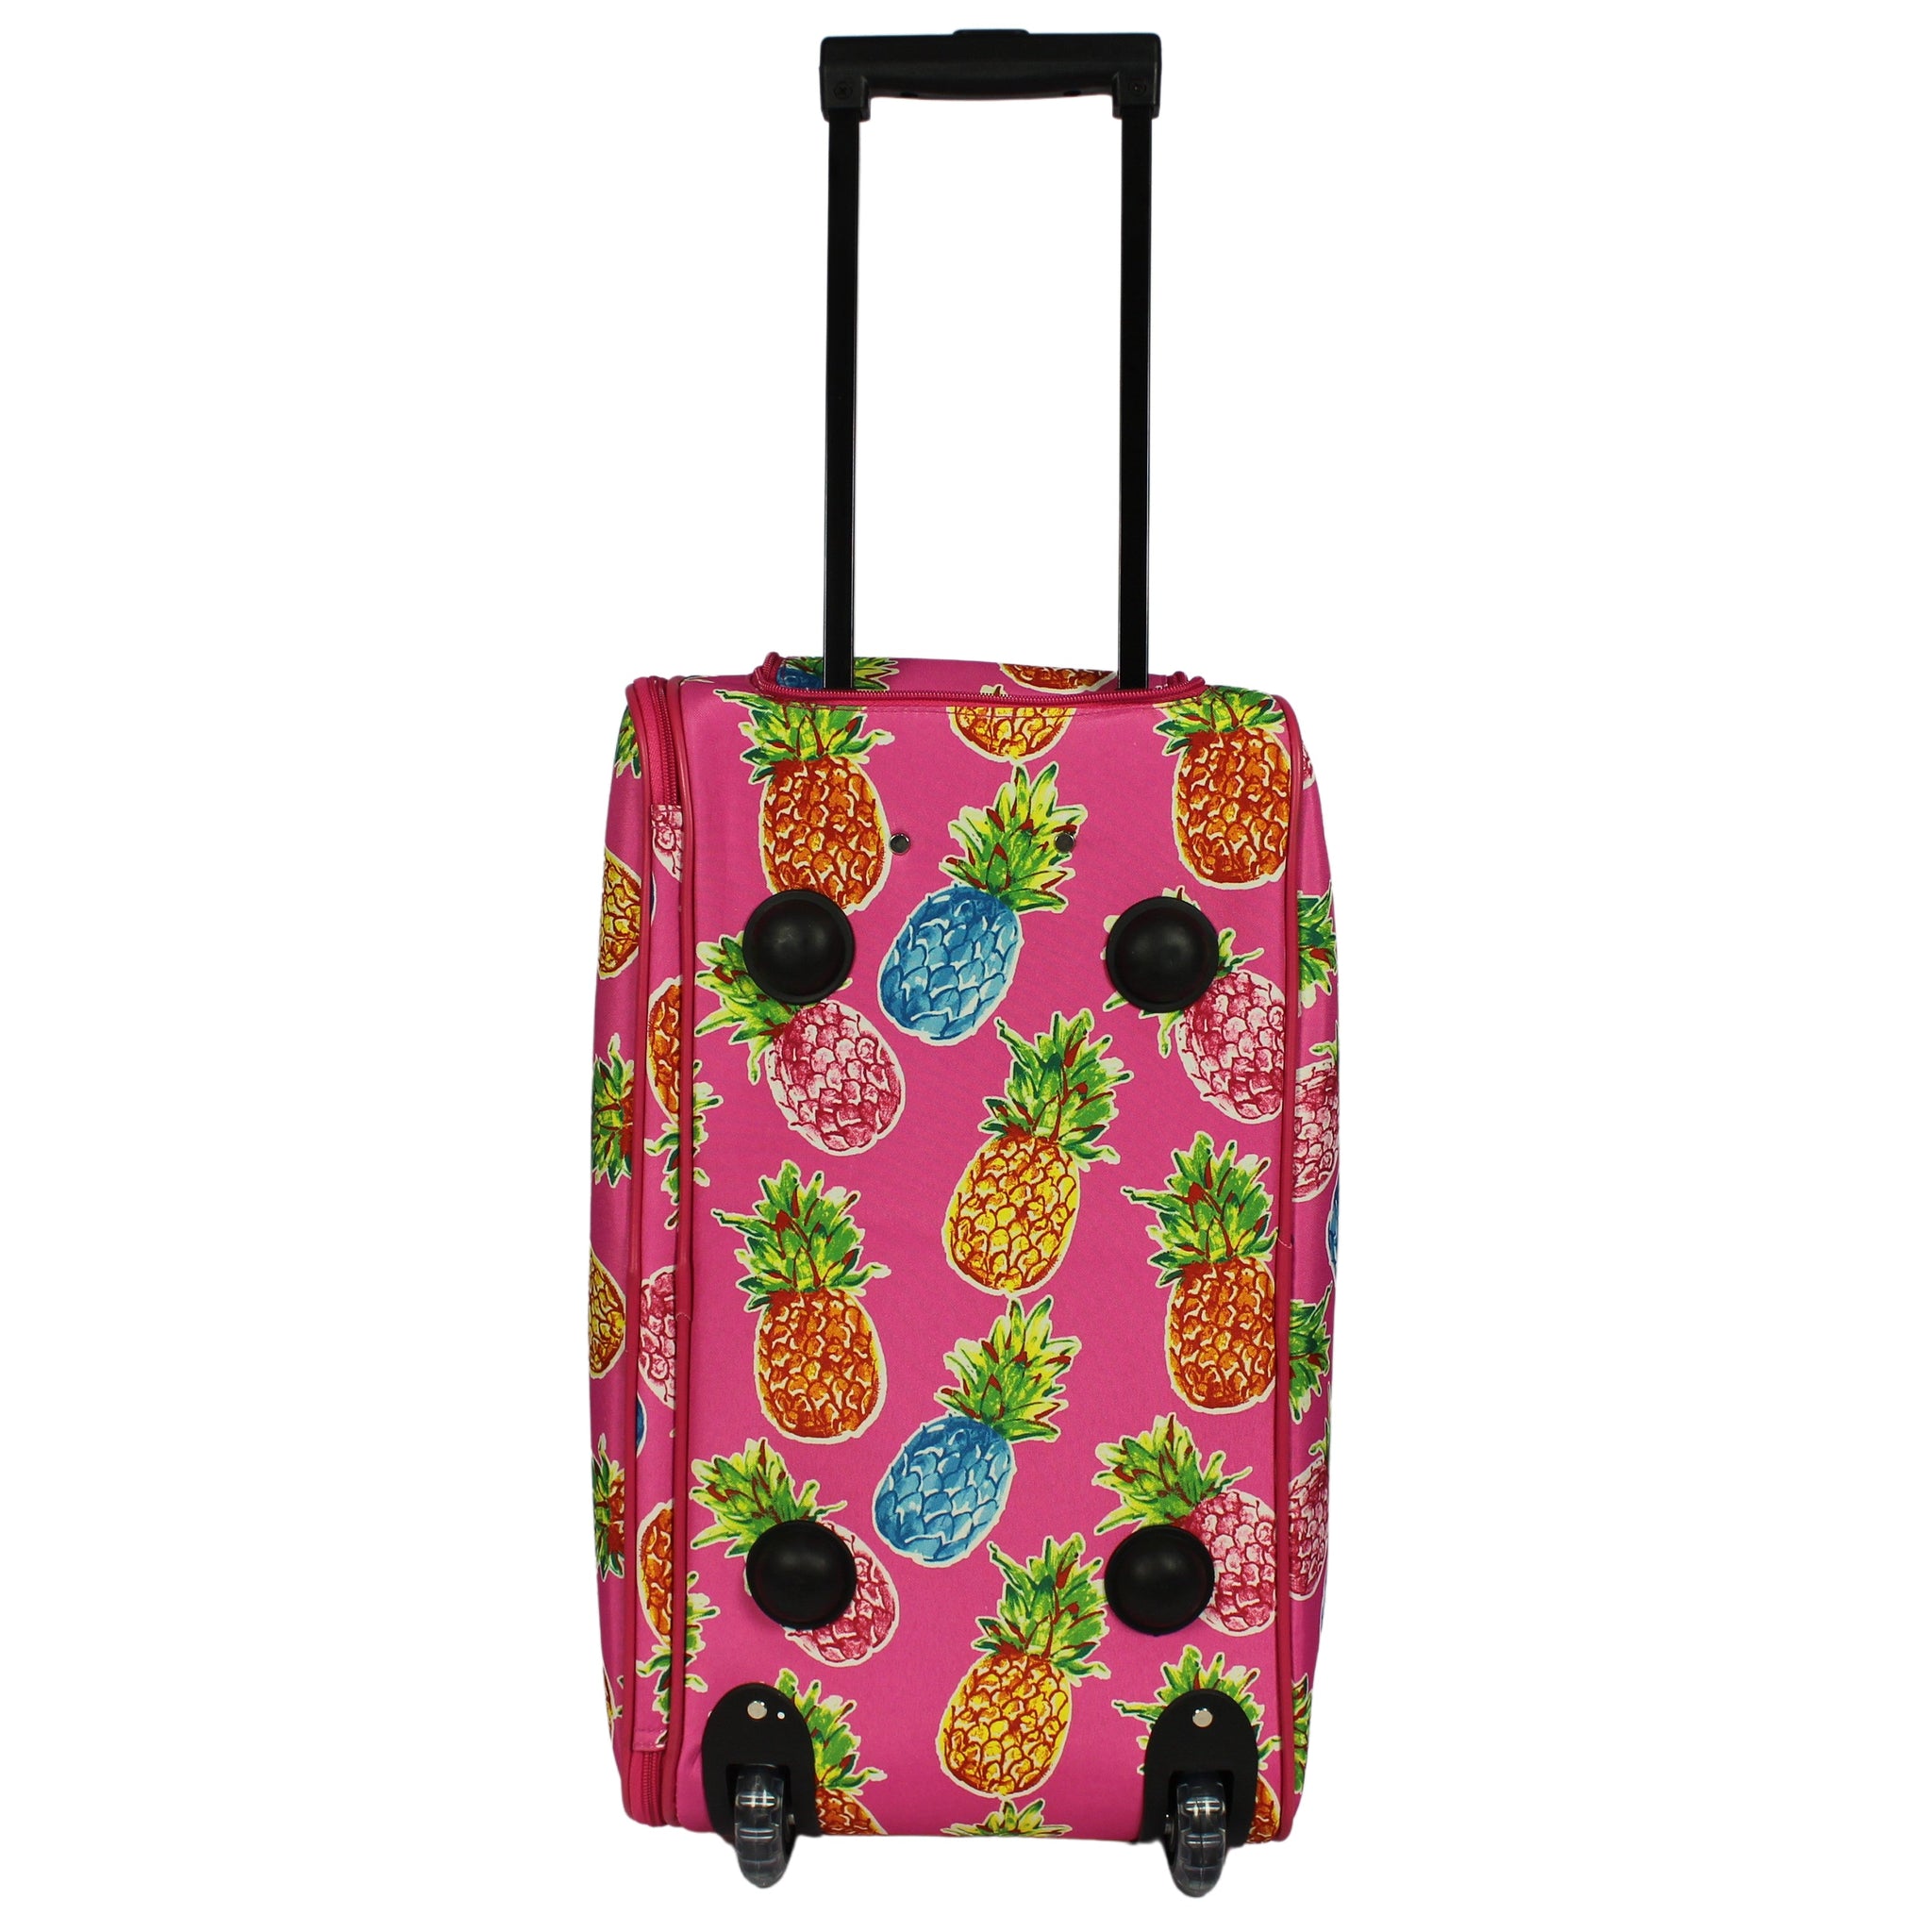 CalBags 21" Rolling Carry-On Duffel Bag - Pineapple